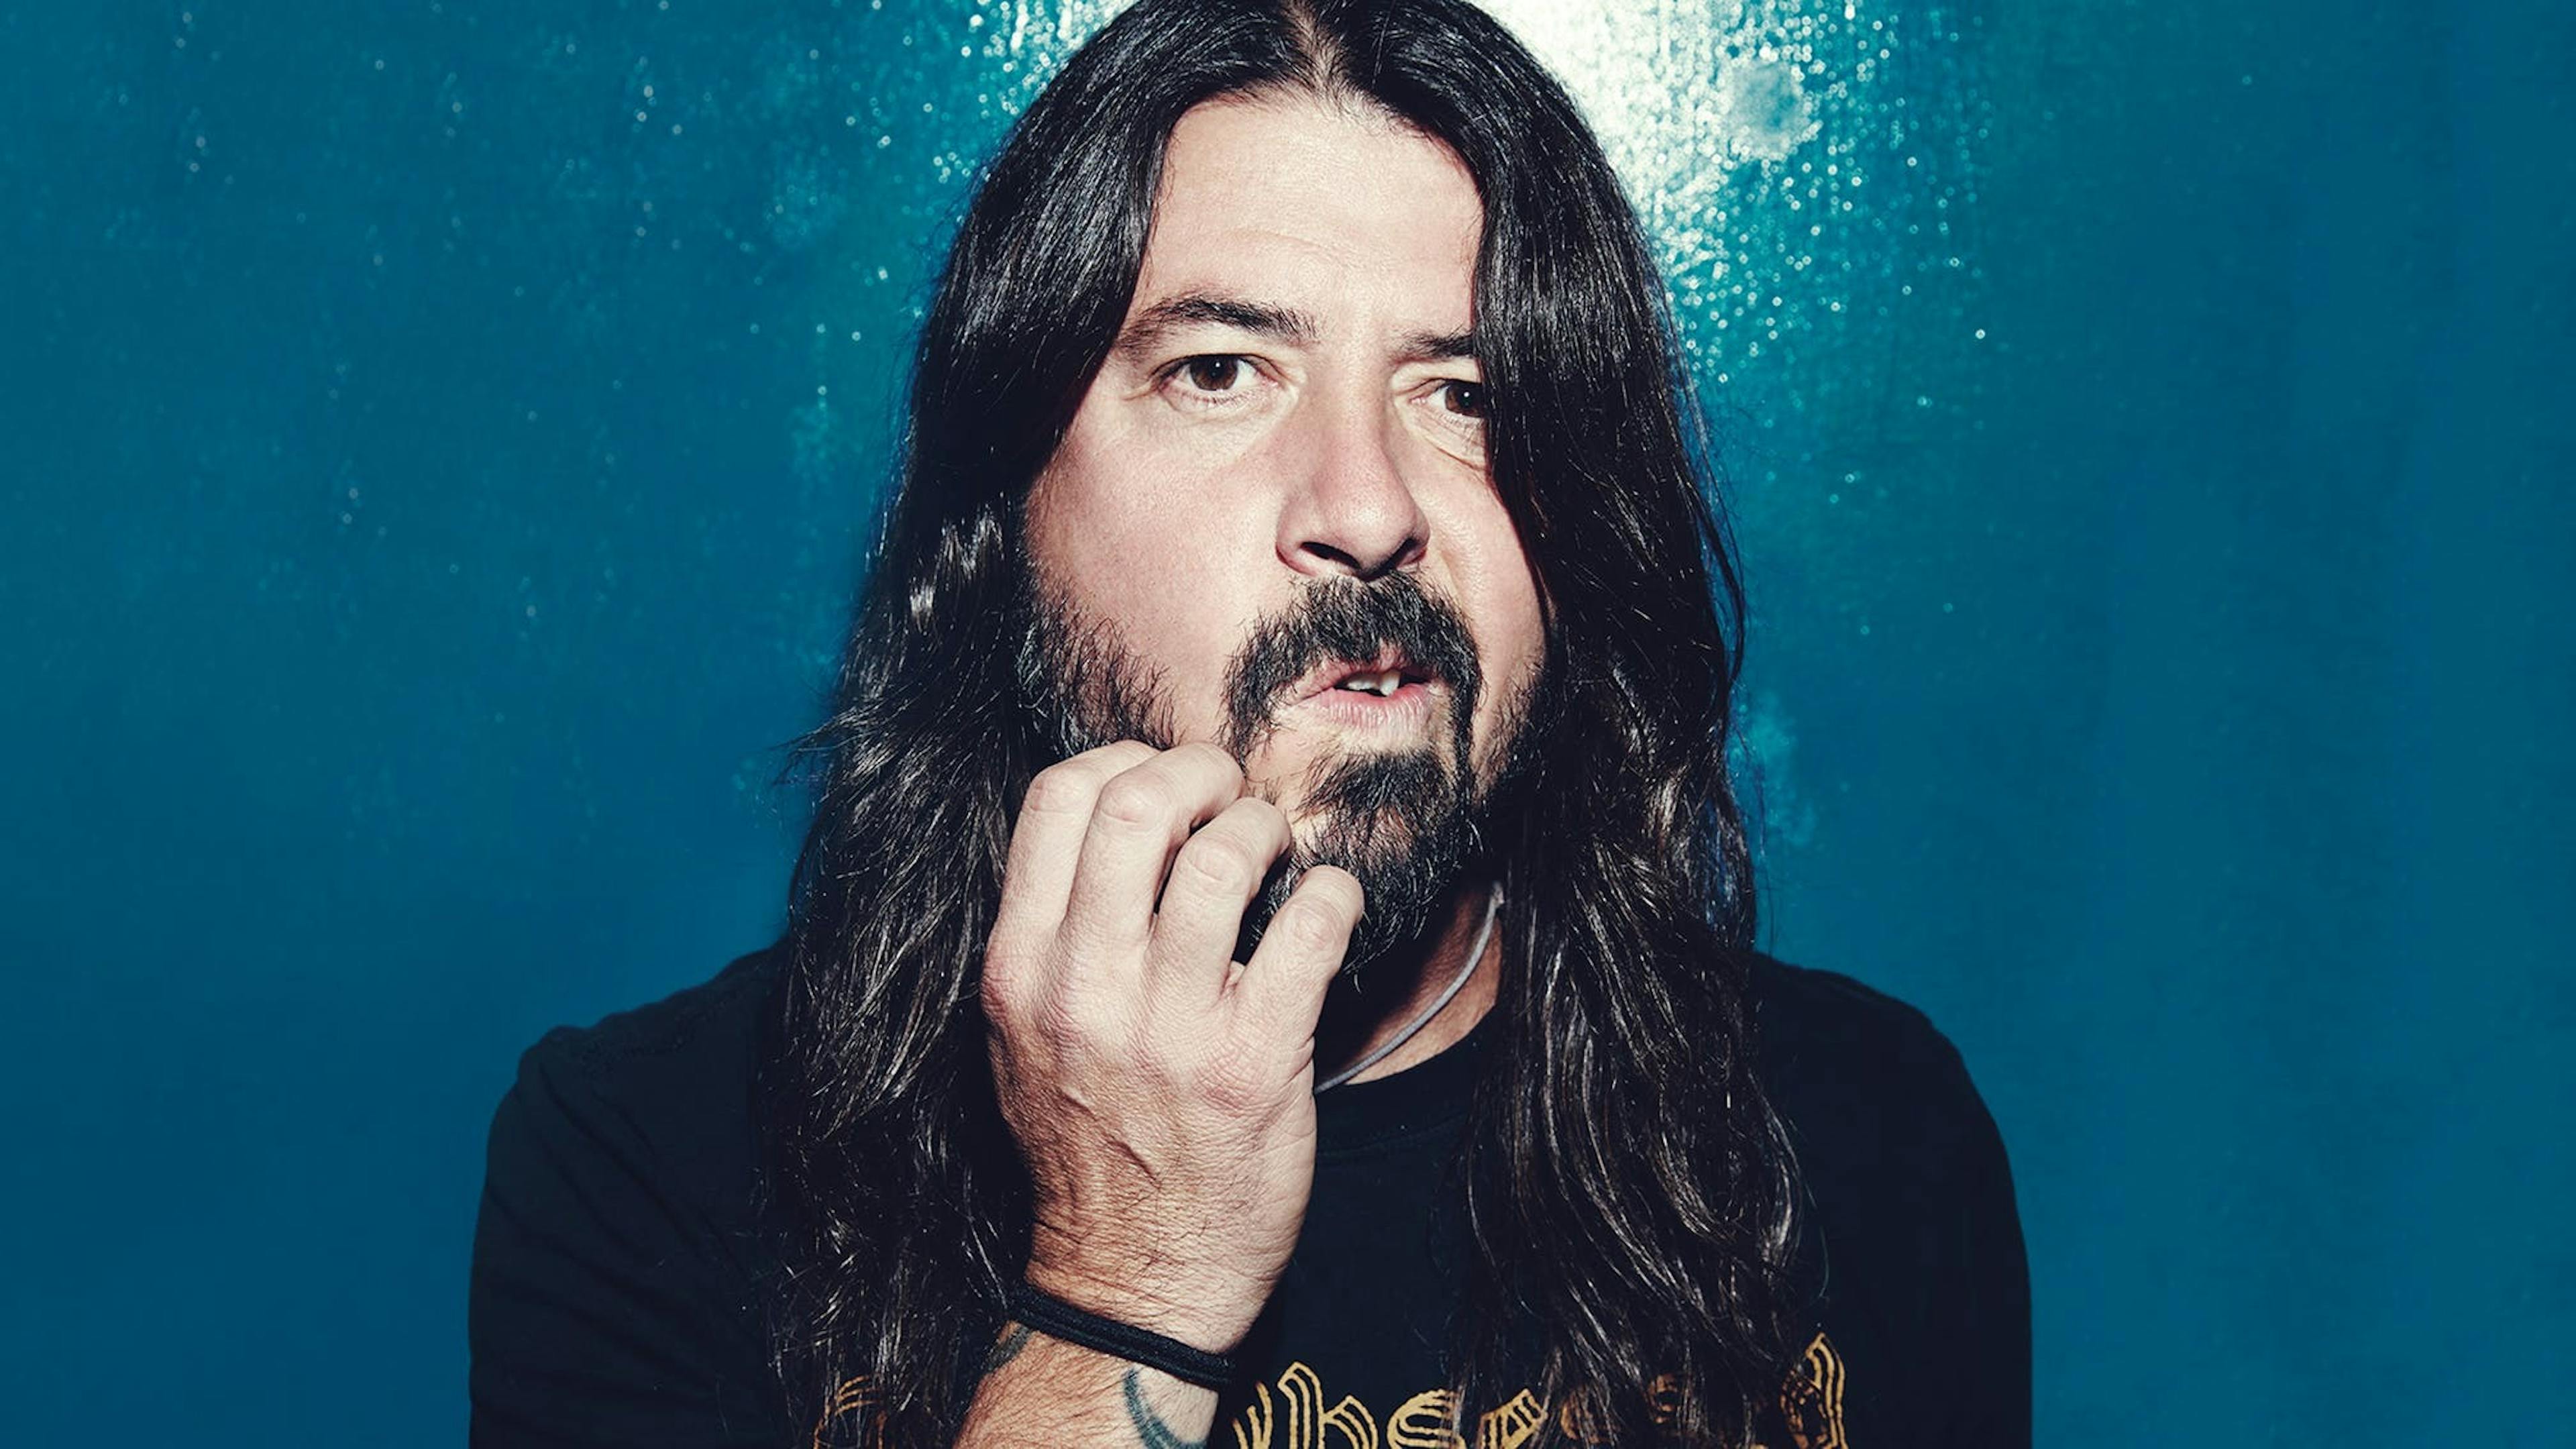 Foo Fighters are teasing something: “Are you thinking what I’m thinking?”